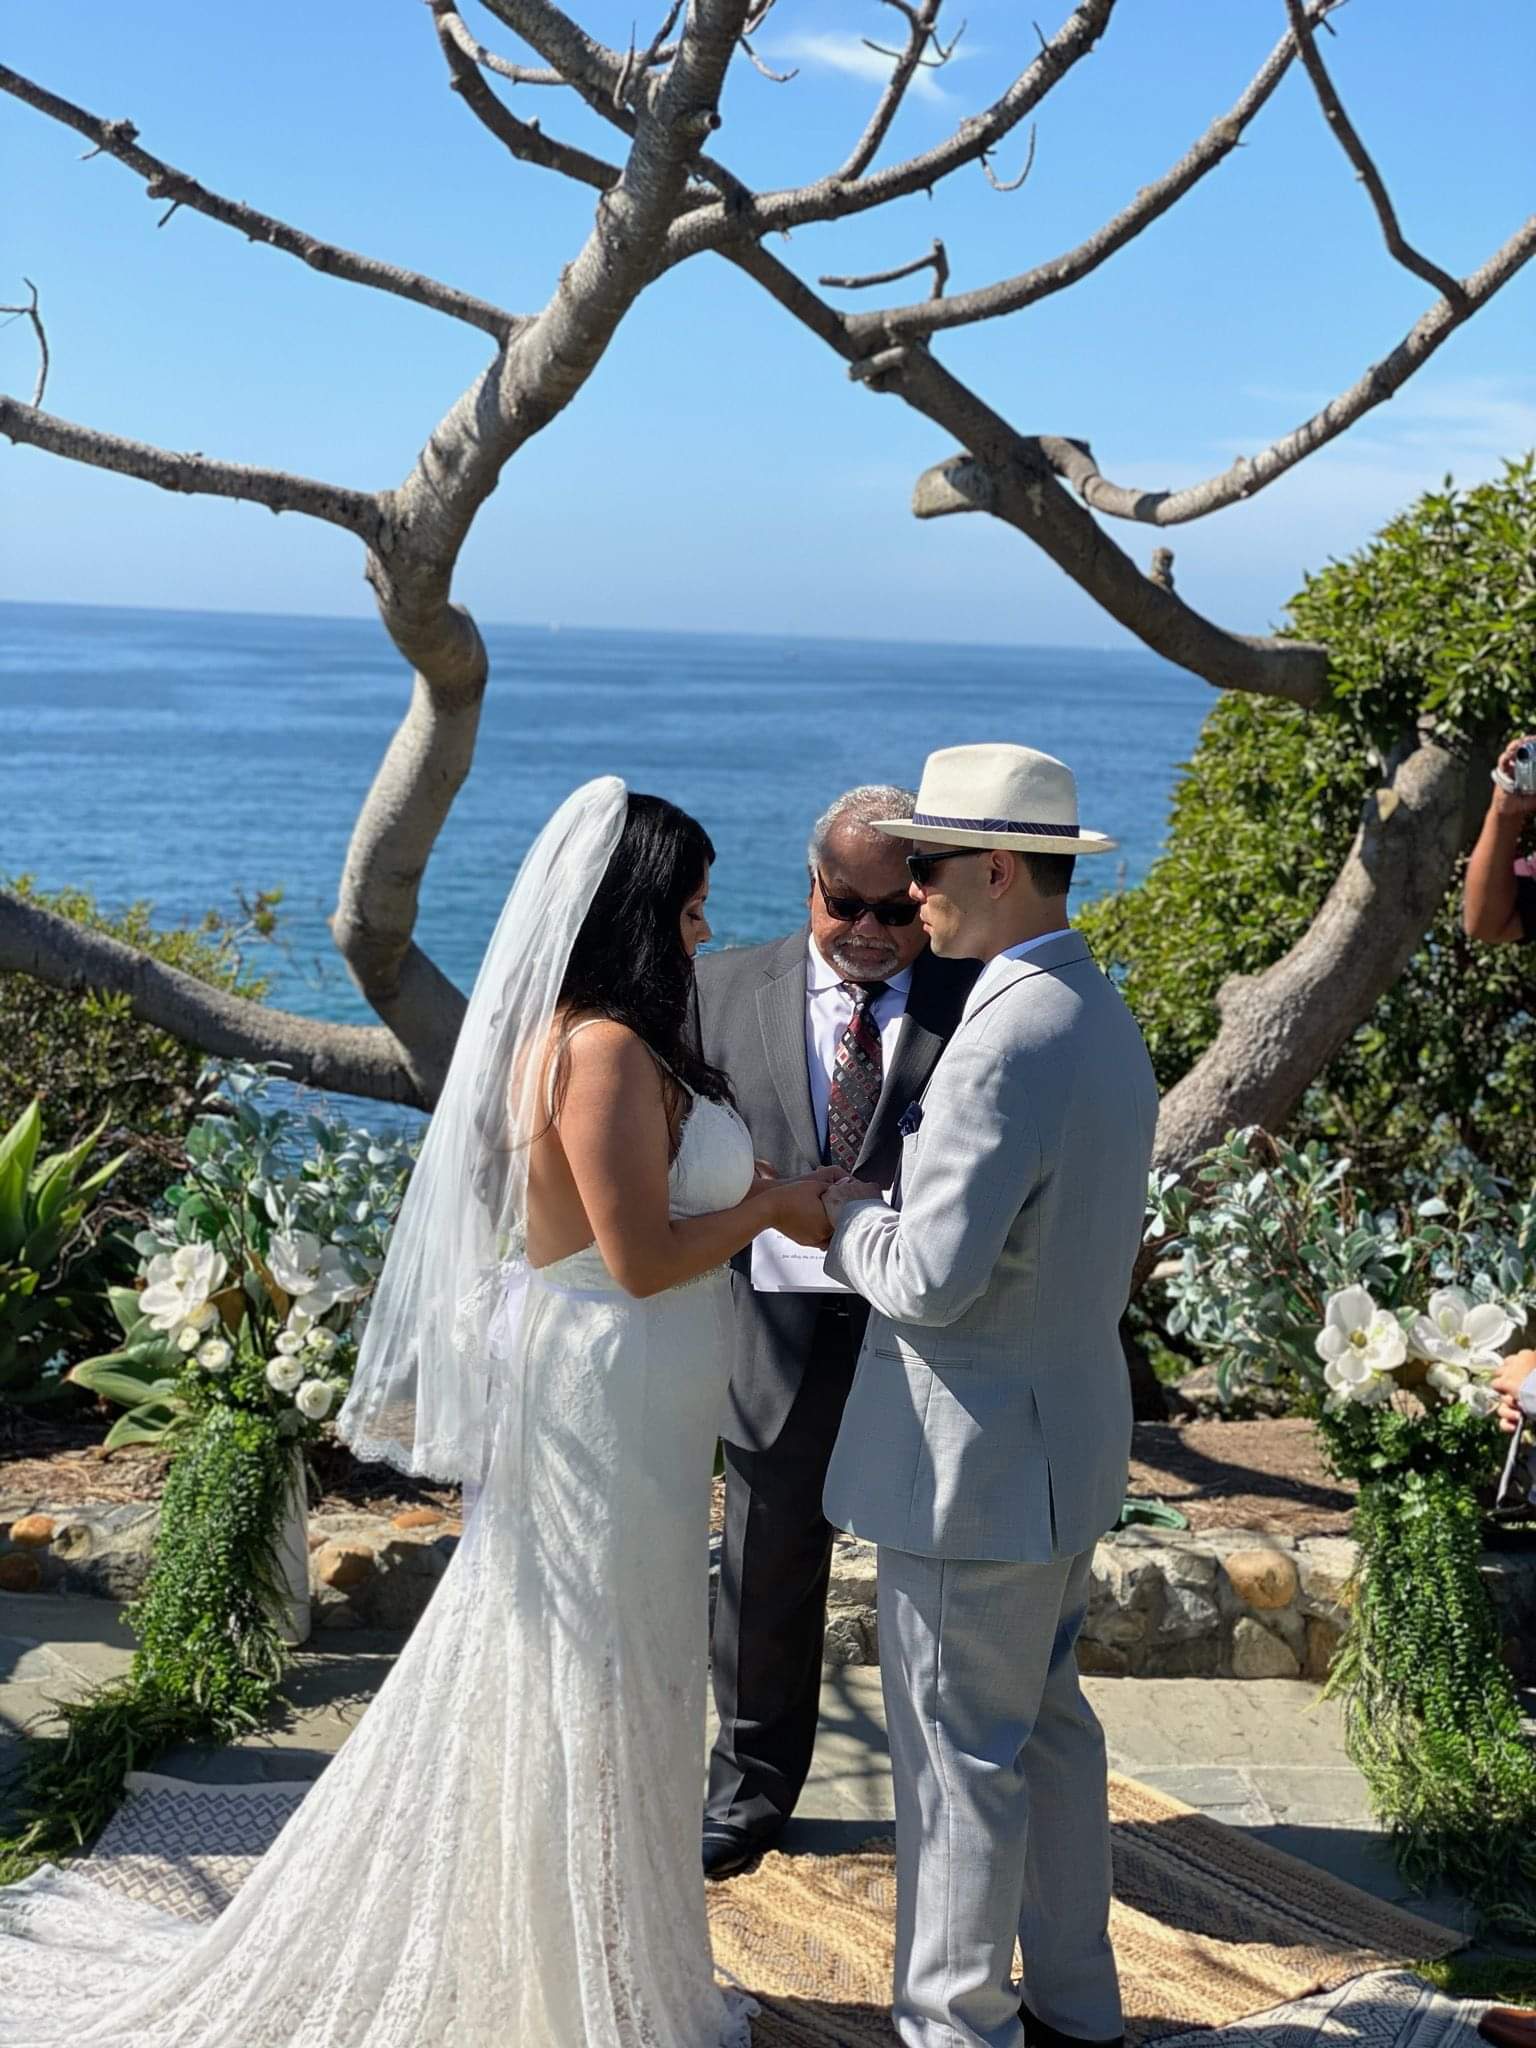 The handsome couple were married in Laguna Beach Ca. The location was at Hiesler Park in Alieso Viejo. The bride selected this location because of the beautiful Seascape which they both enjoy. Absolutely stunning